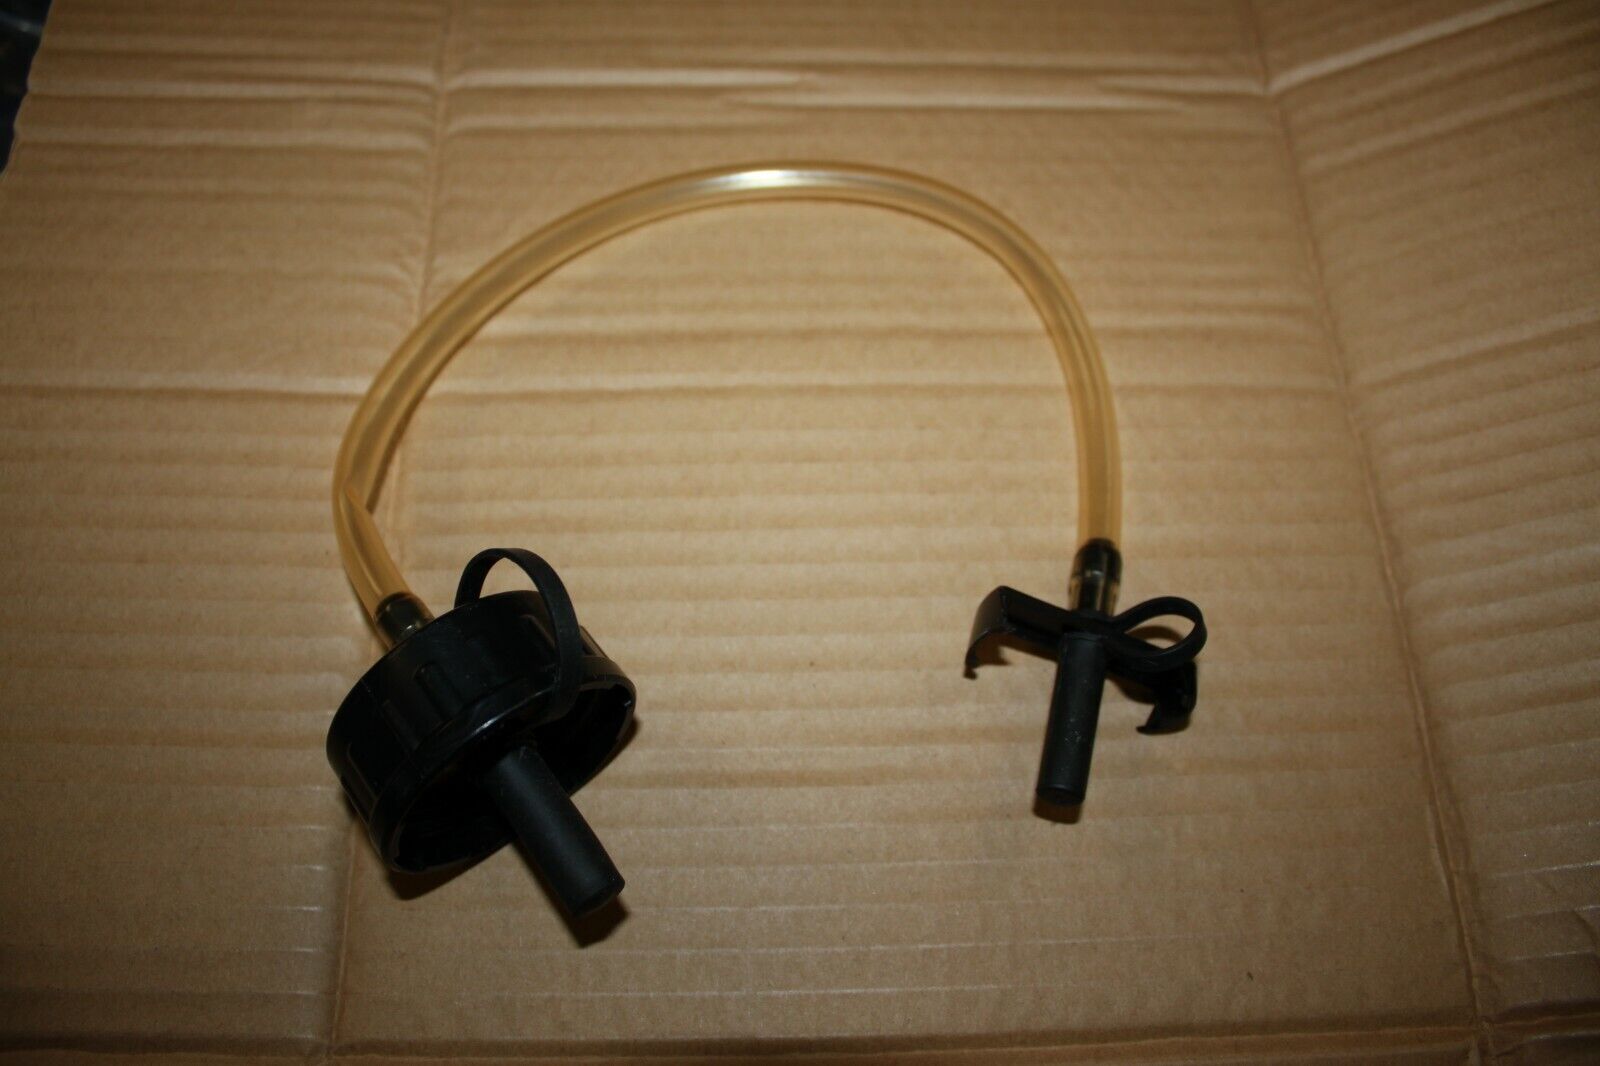 New External Drinking Straw Hydration Set for MP5 Polish and French ARF/ANP VP F1 Military Gas Mask